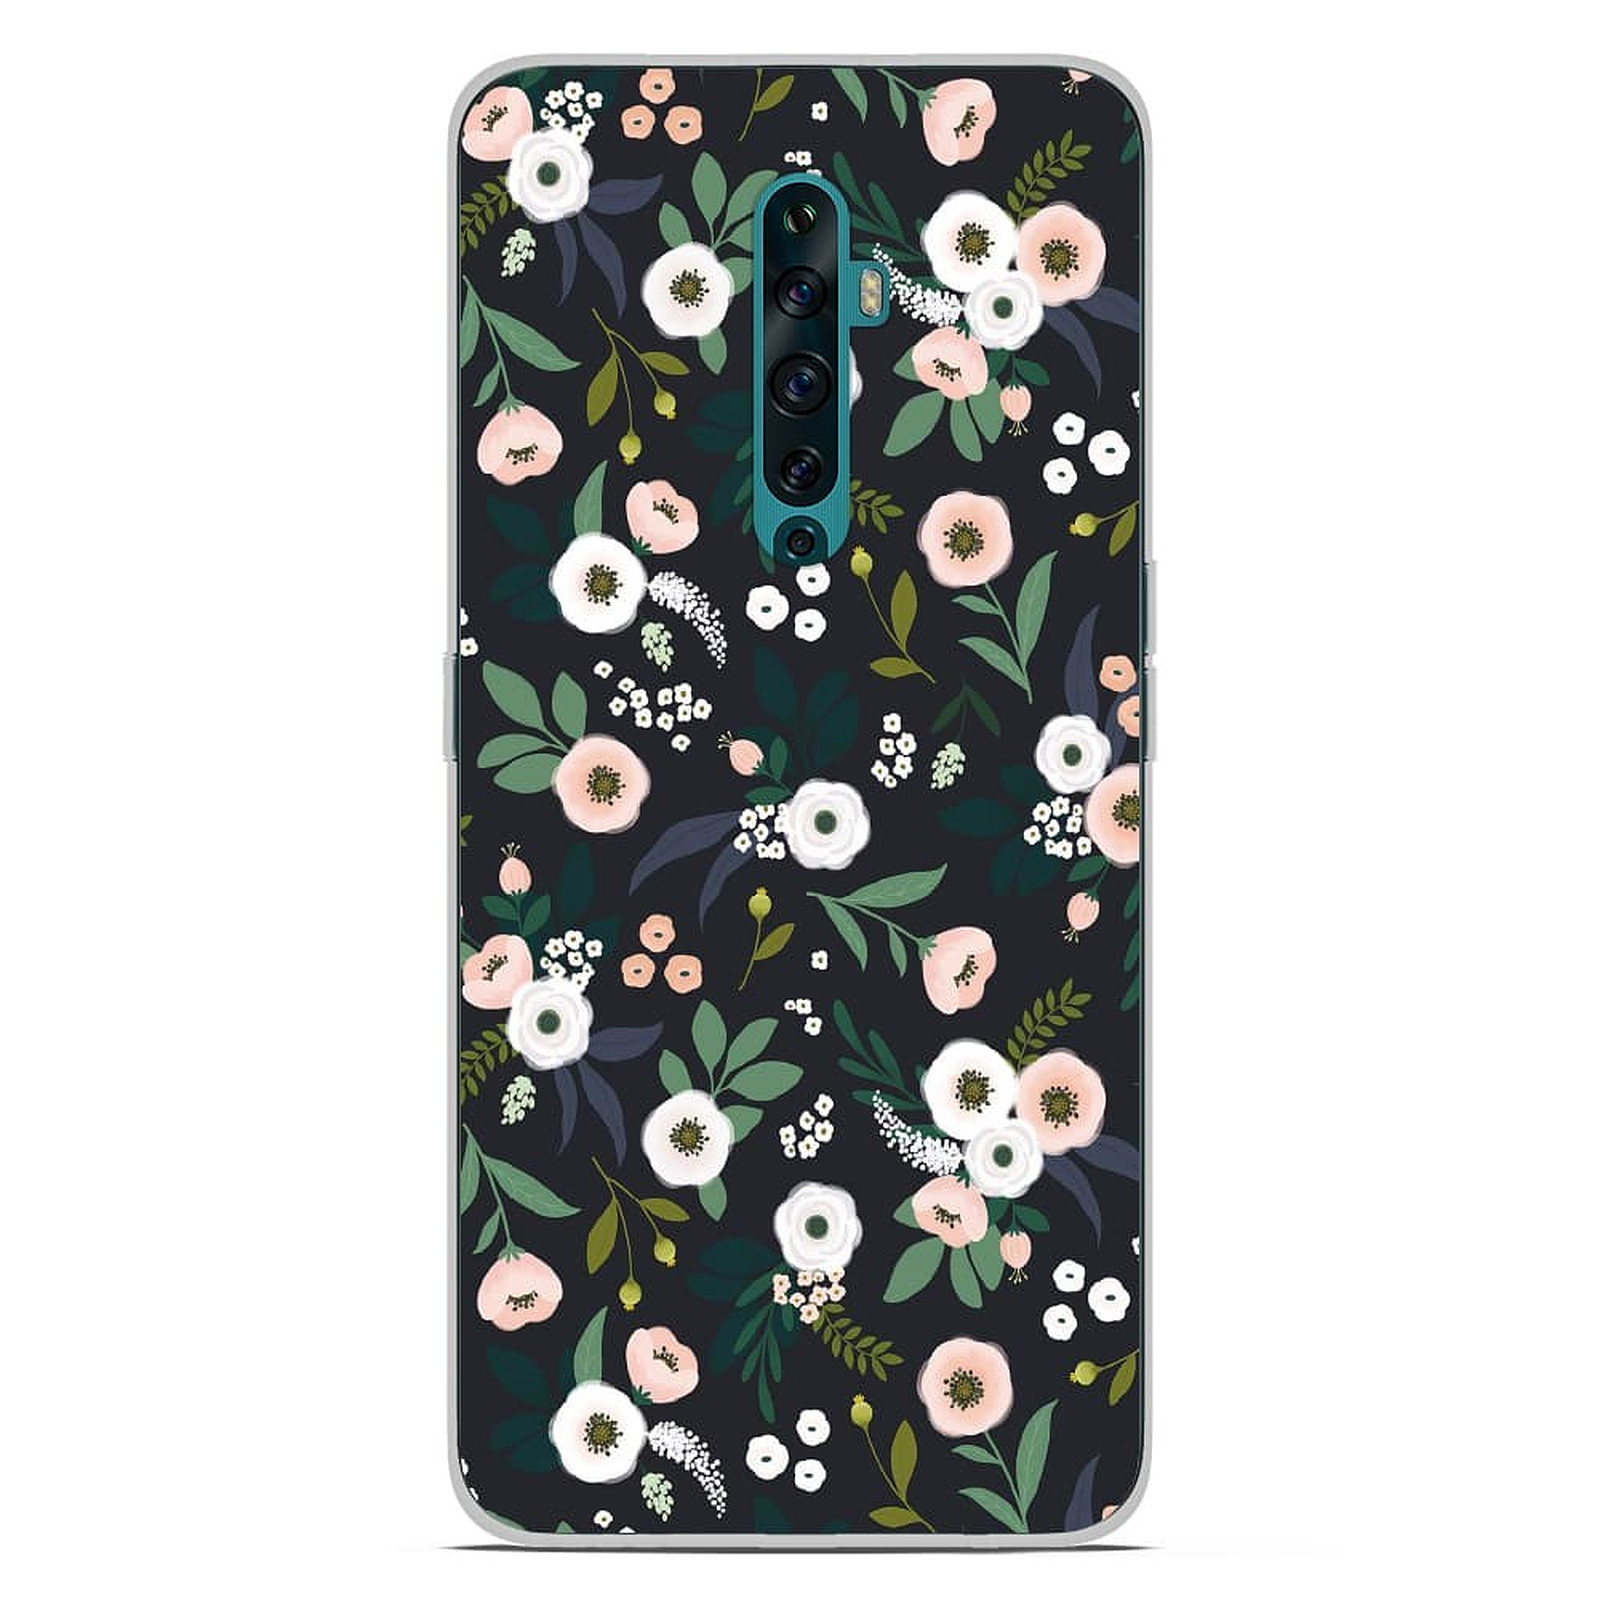 1001 Coques Coque silicone gel Oppo Reno 2Z motif Flowers Noir - Coque telephone 1001Coques